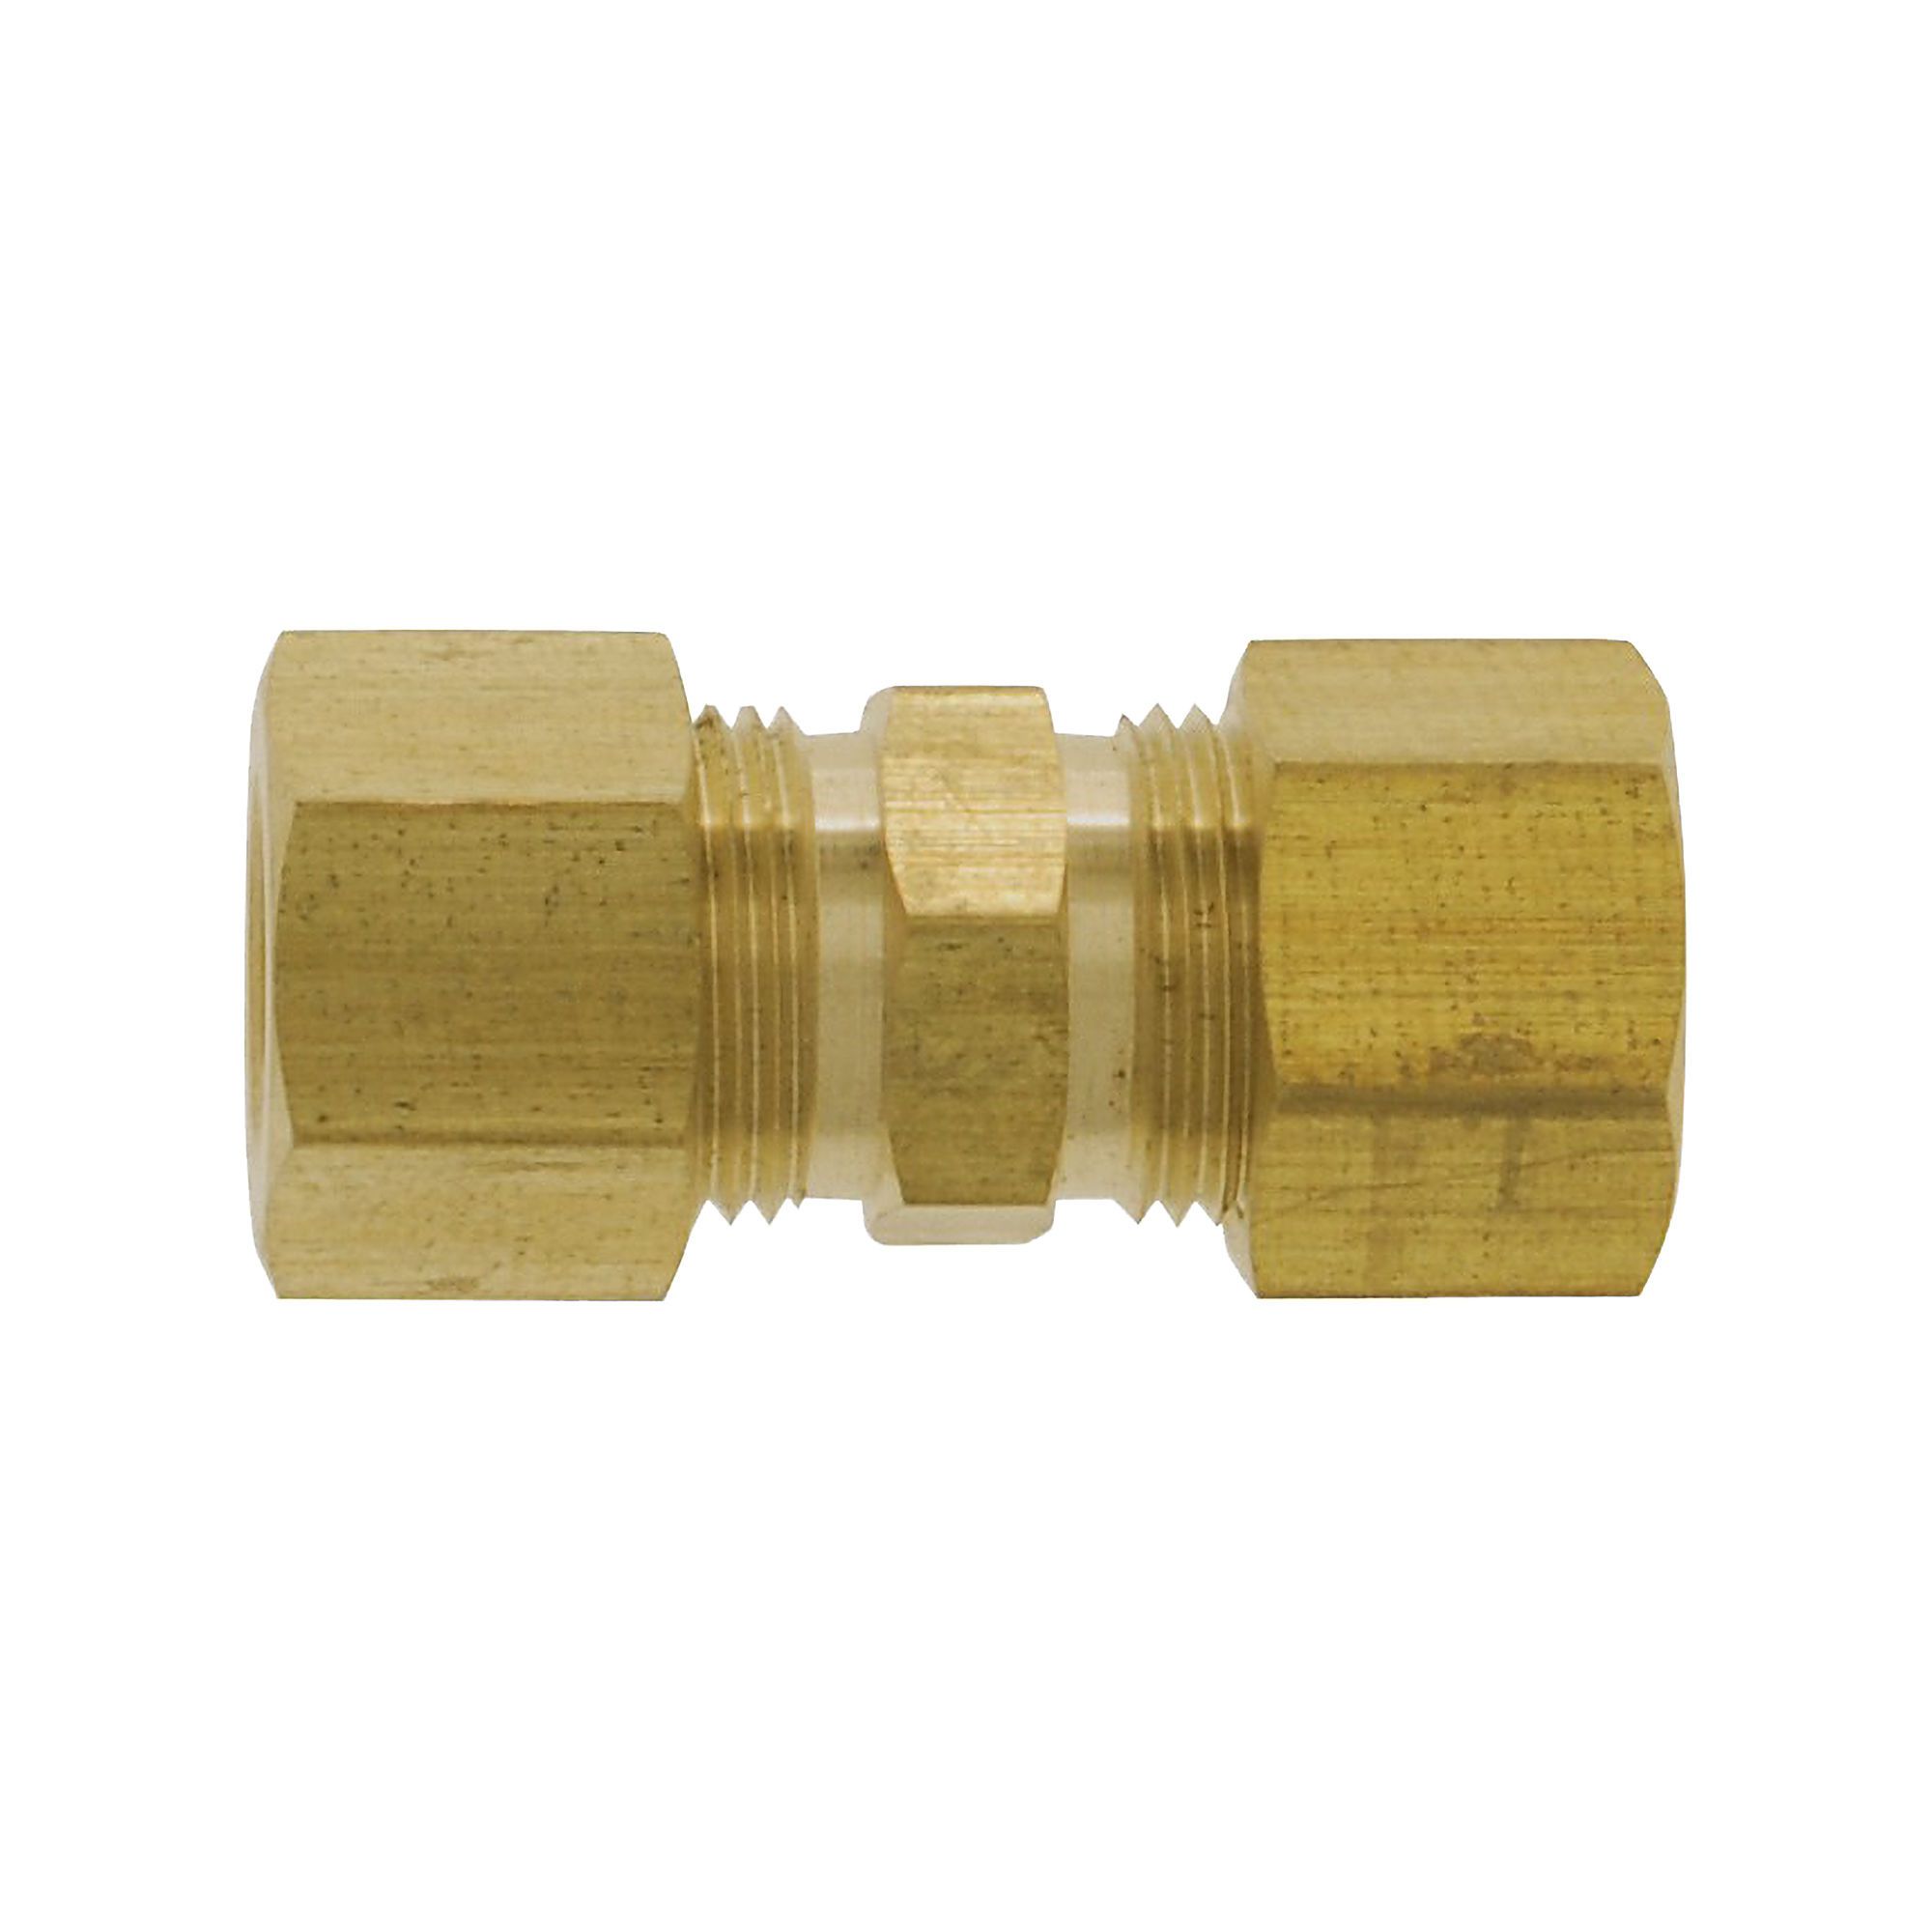 Union compression brass 3/8 from SANBEC CANADA